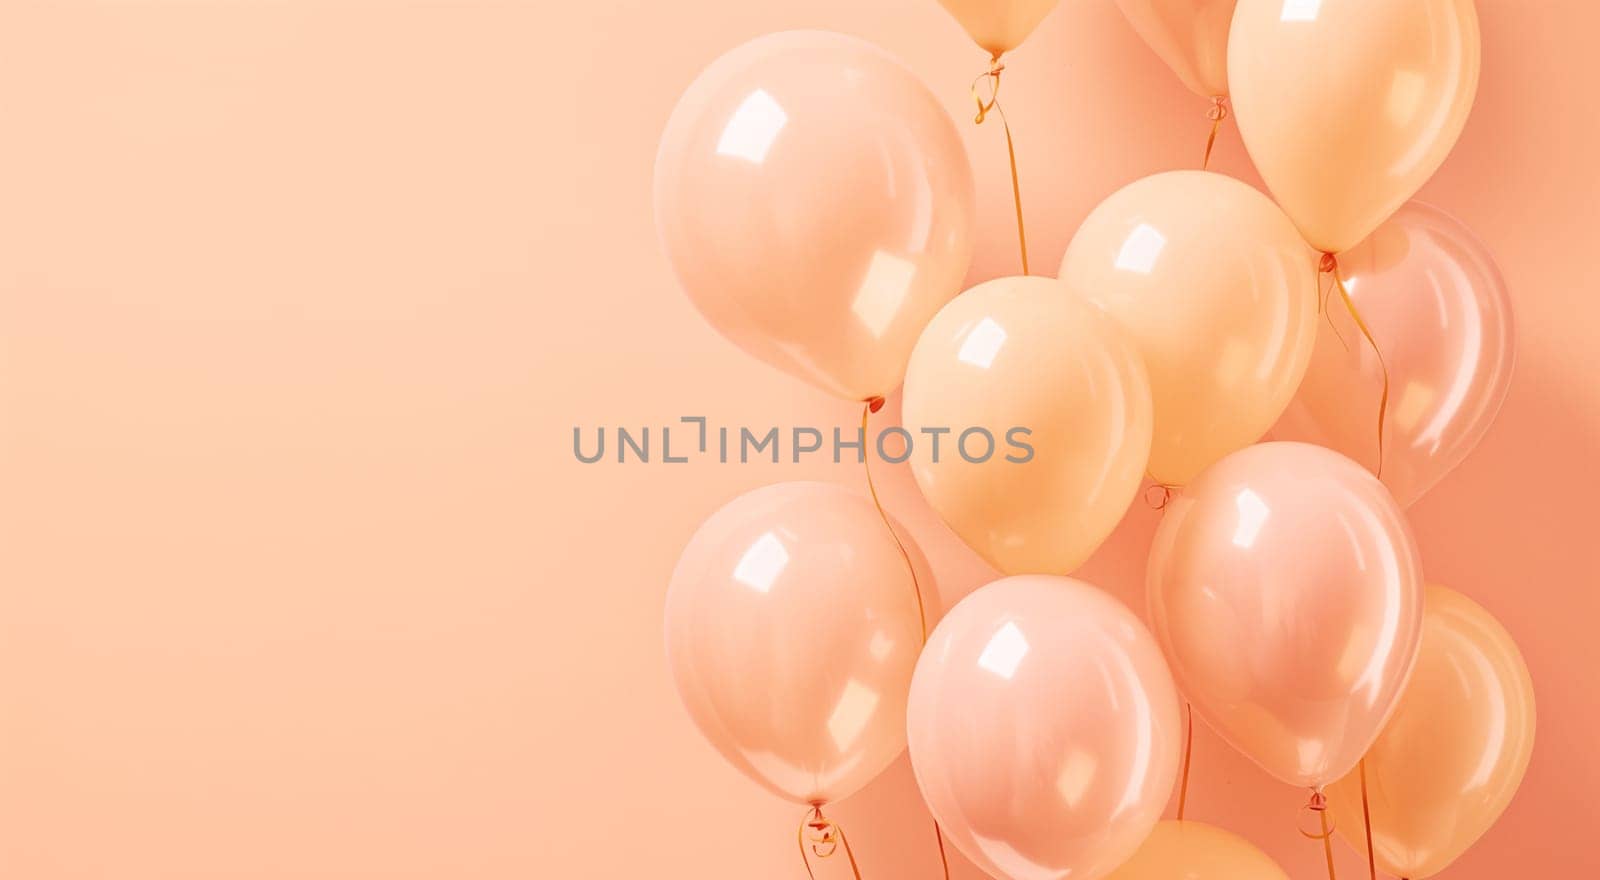 Peach-colored balloons on a soft pink background, festive and airy feel by kizuneko